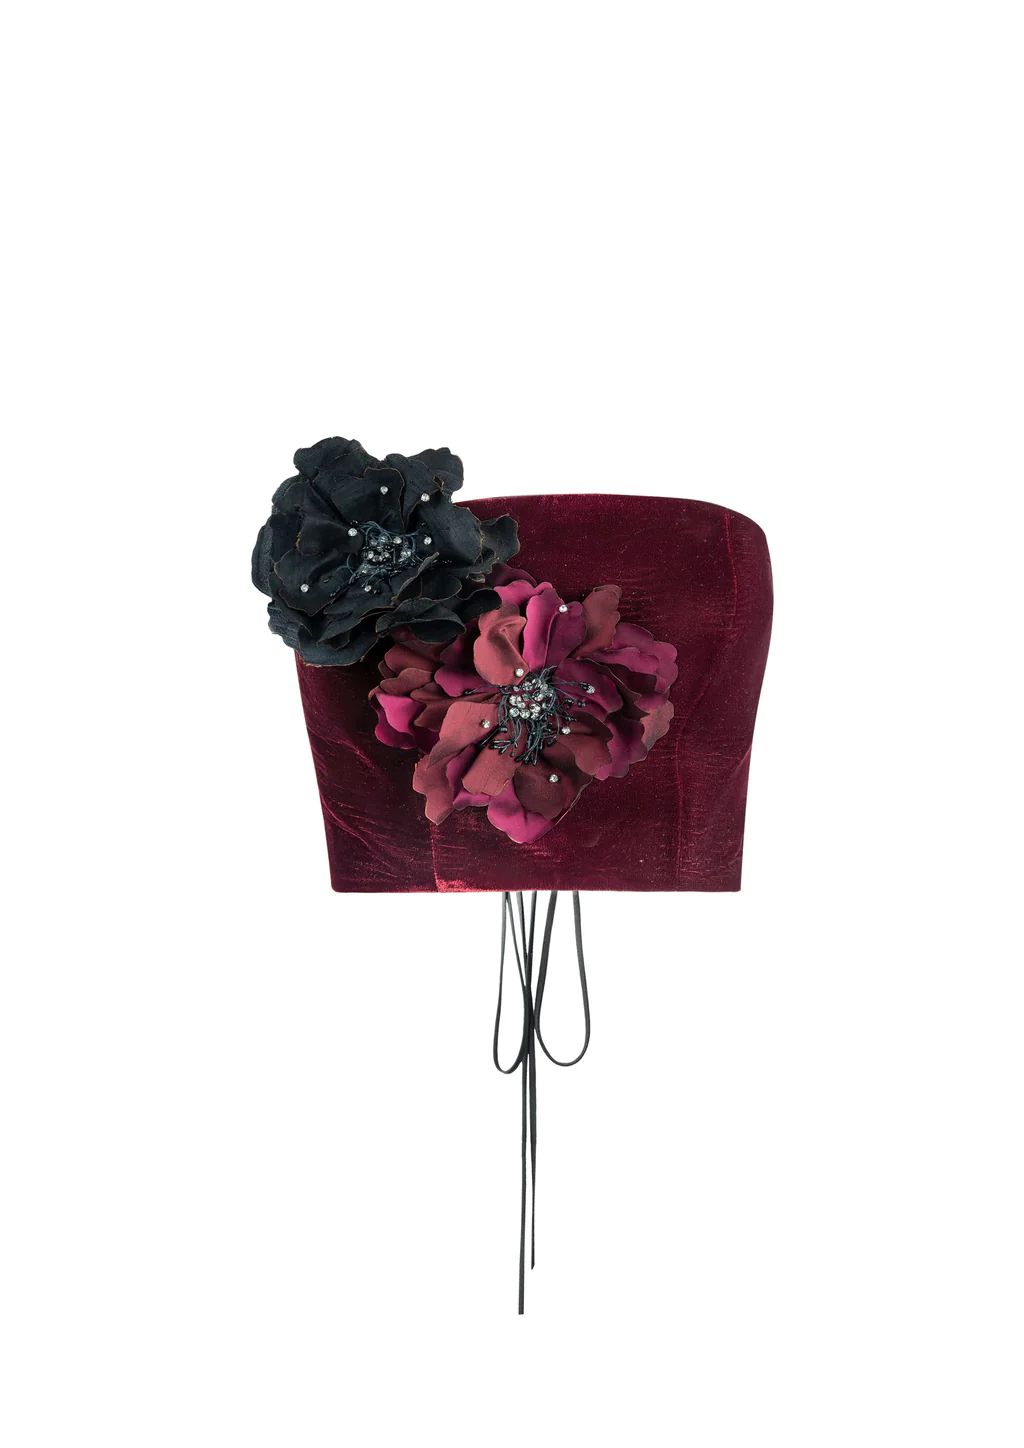 Persica Floral Bustier - Burgundy & Black (Limited Edition) | Rosewater Collective